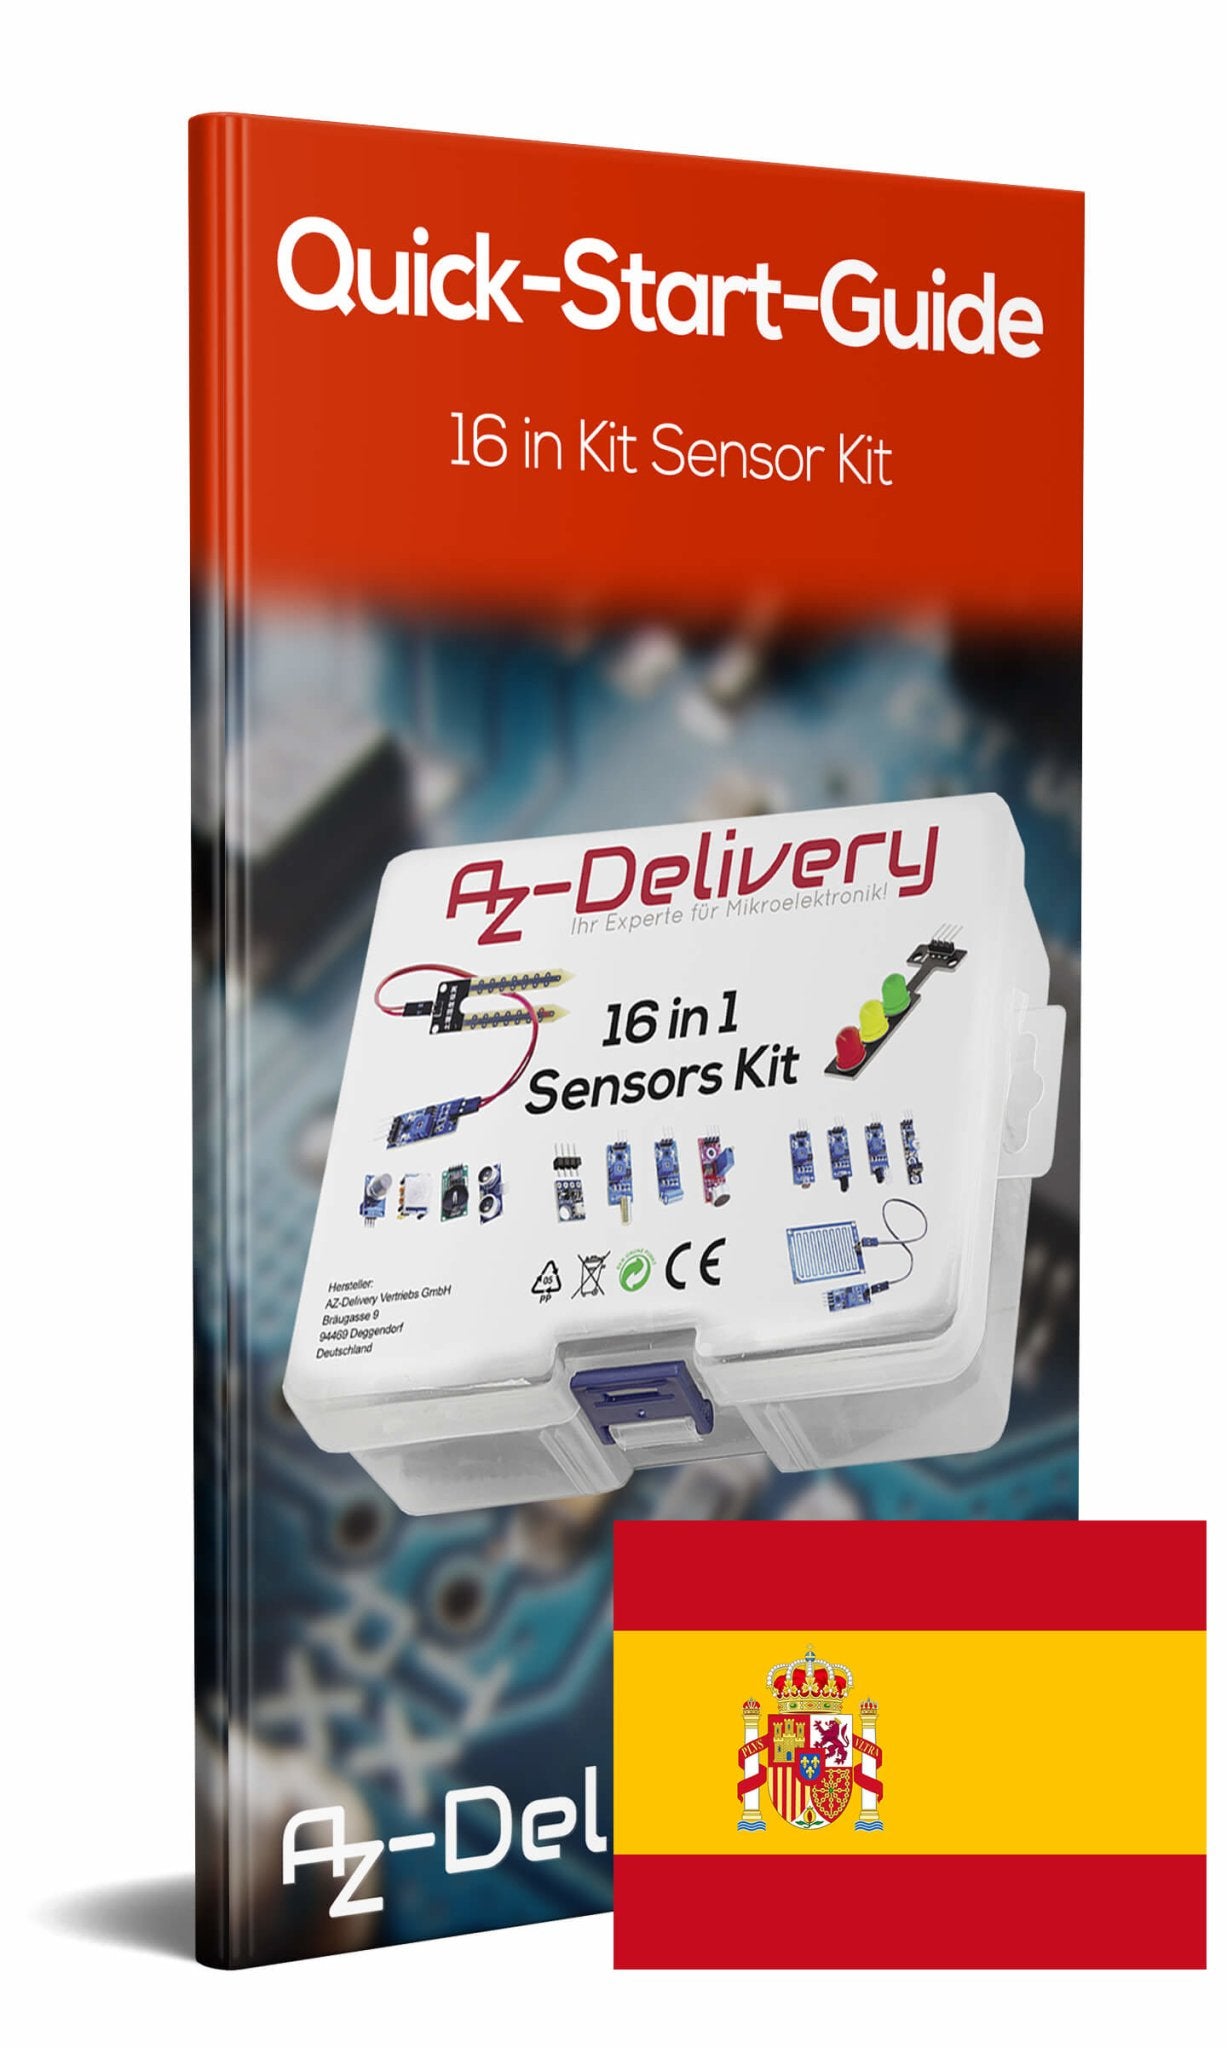 16 In 1 kit accessory set with sensors and modules for Raspberry Pi